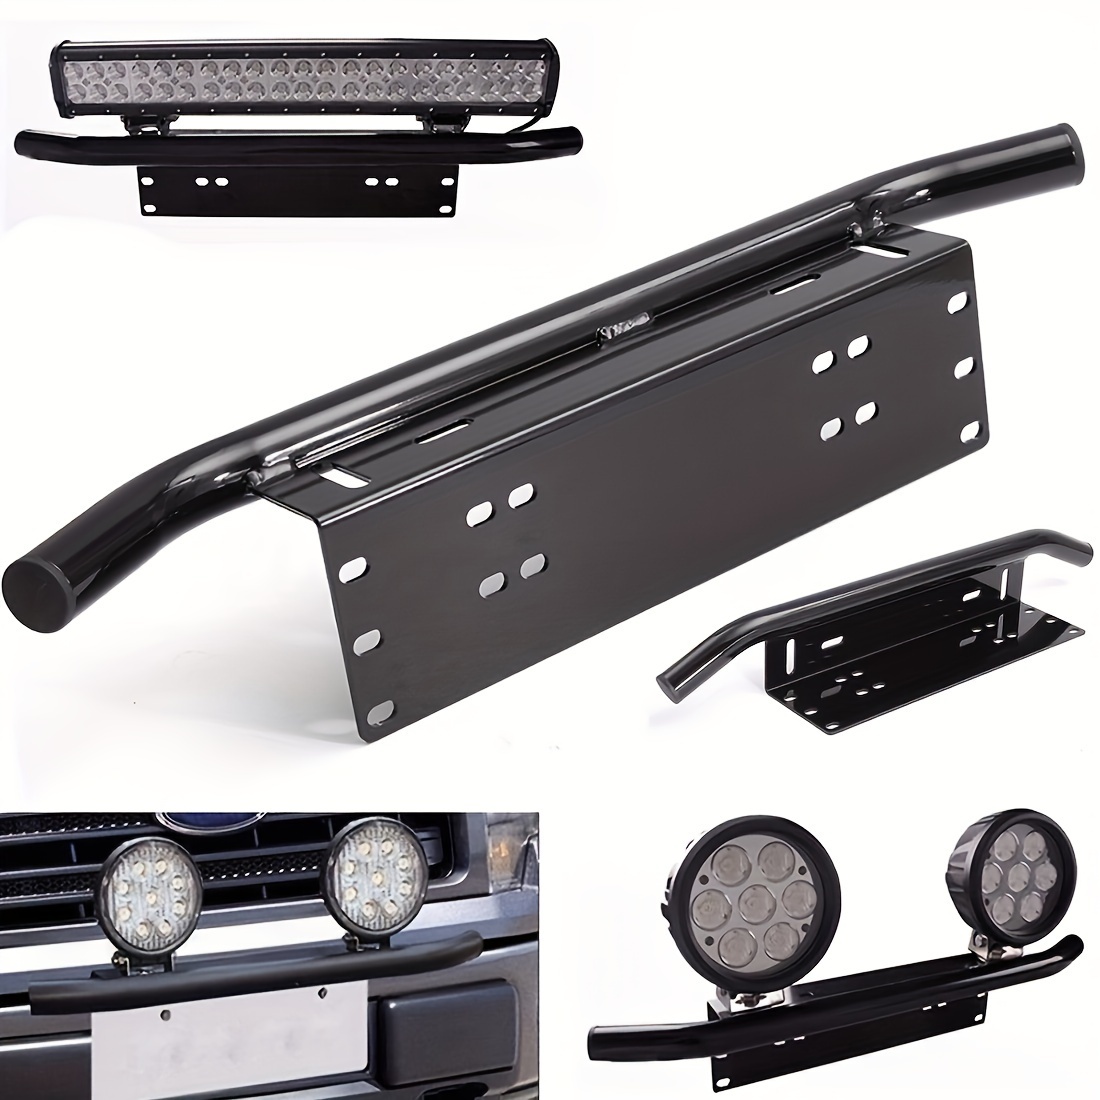 

Universal Spotlight Frame Car Auxiliary Lamp Light & Off-road License Plate Light Modification